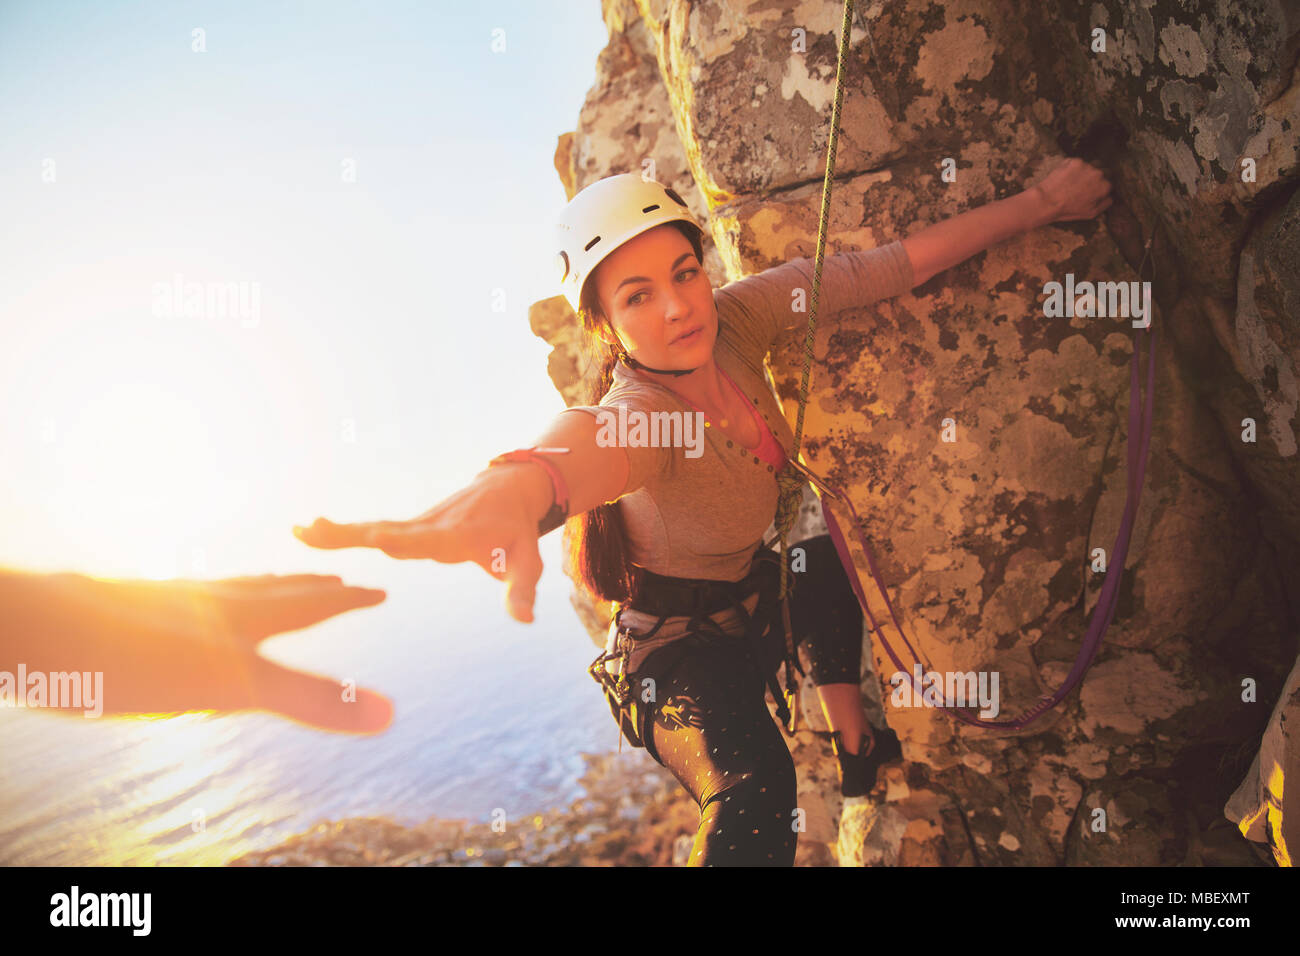 Female rock climber reaching for helping hand Stock Photo